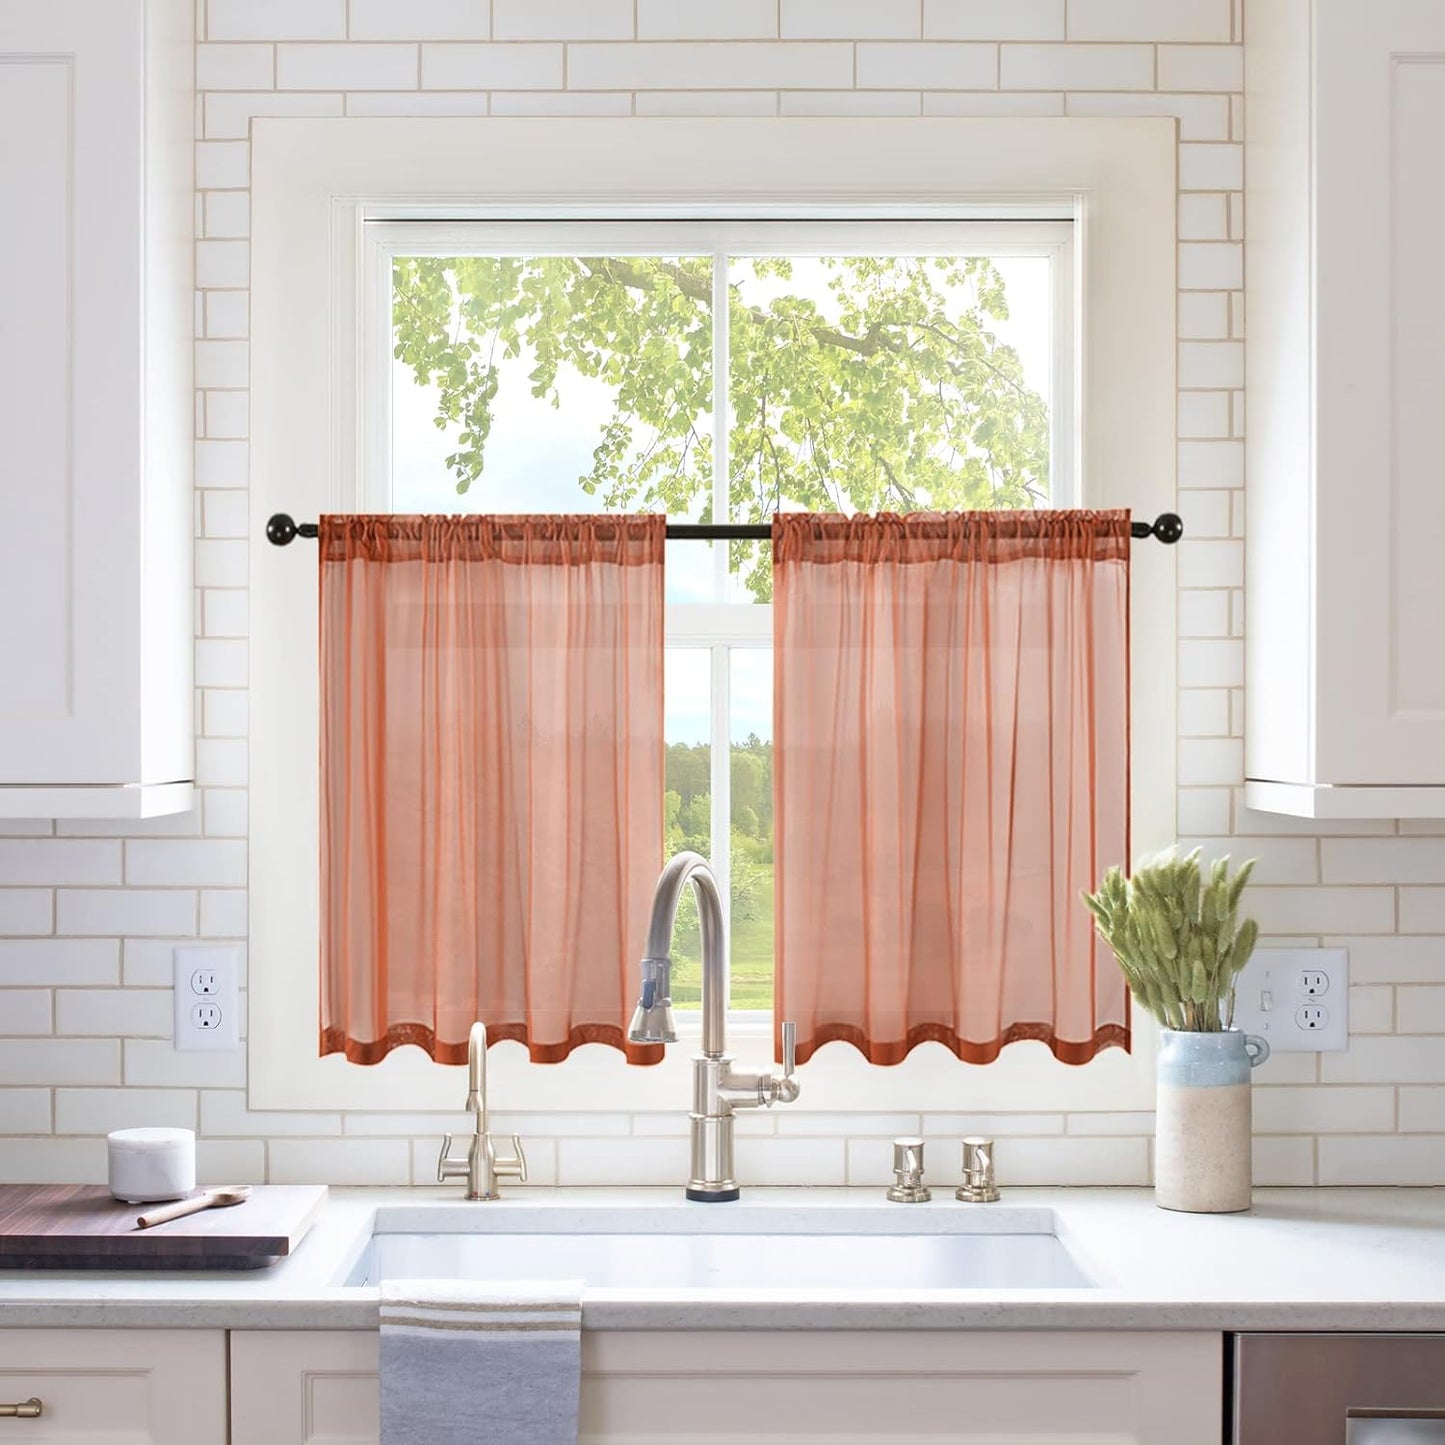 MIULEE White Sheer Curtains 96 Inches Long Window Curtains 2 Panels Solid Color Elegant Window Voile Panels/Drapes/Treatment for Bedroom Living Room (54 X 96 Inches White)  MIULEE Burnt Orange 29''W X 36''L 